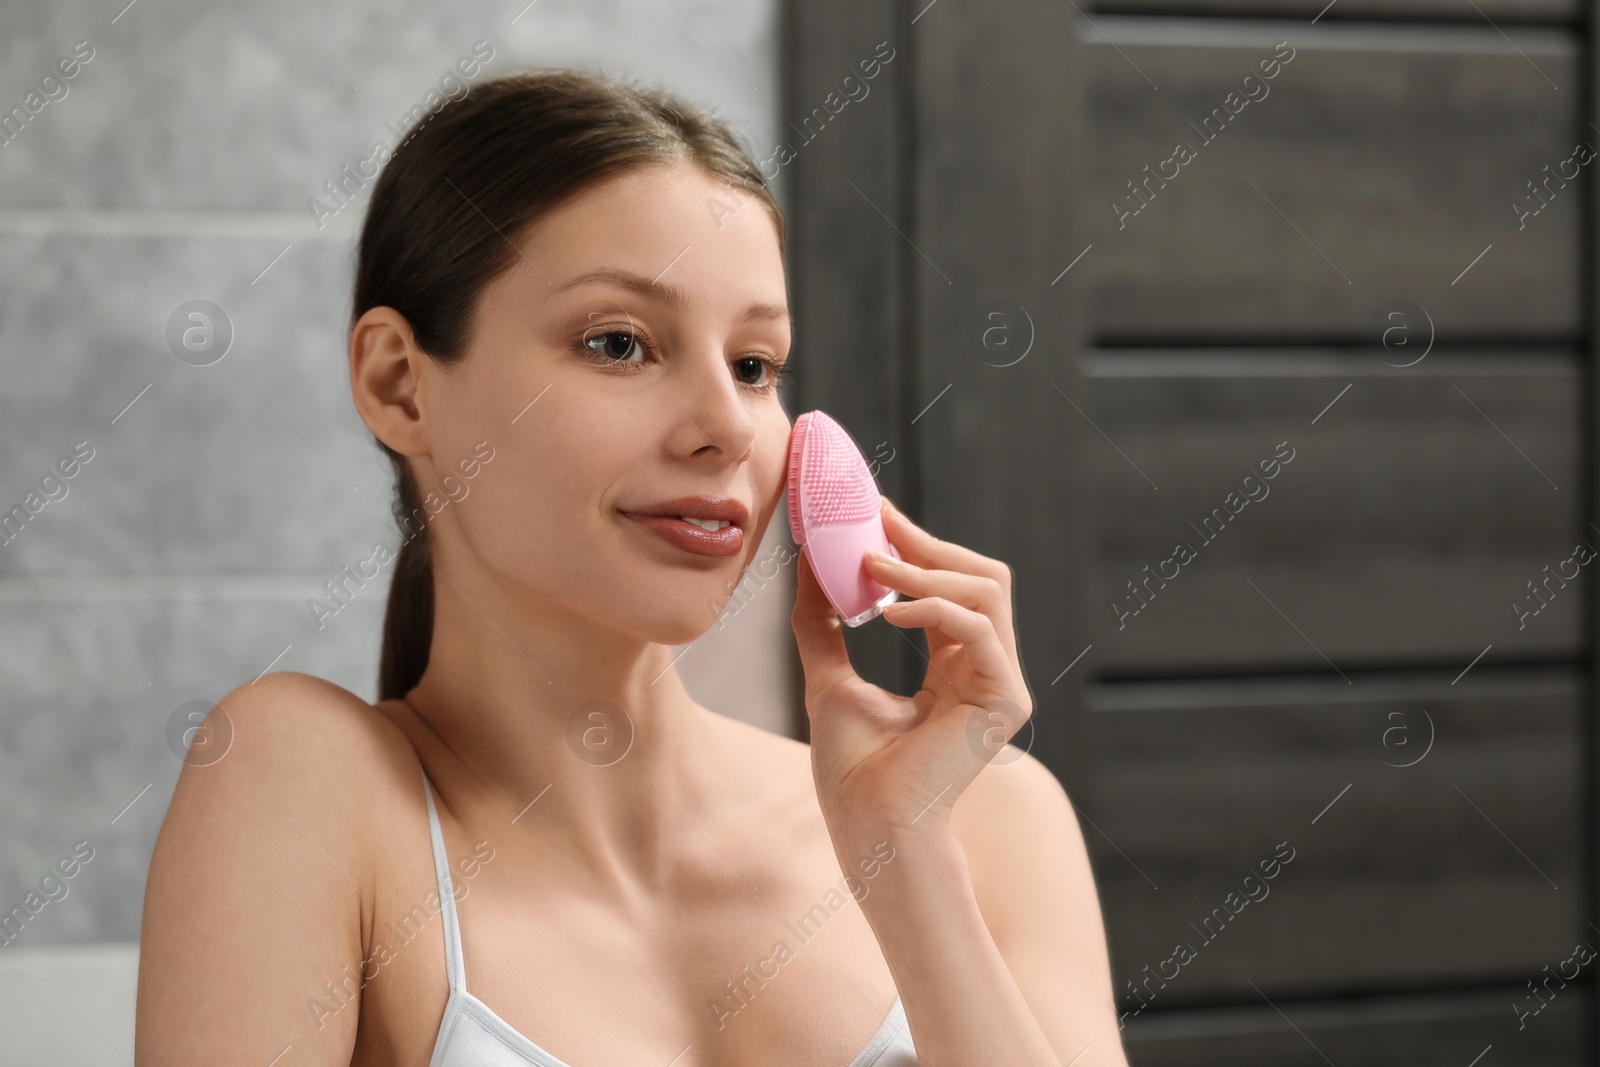 Photo of Washing face. Young woman with cleansing brush in bathroom, space for text